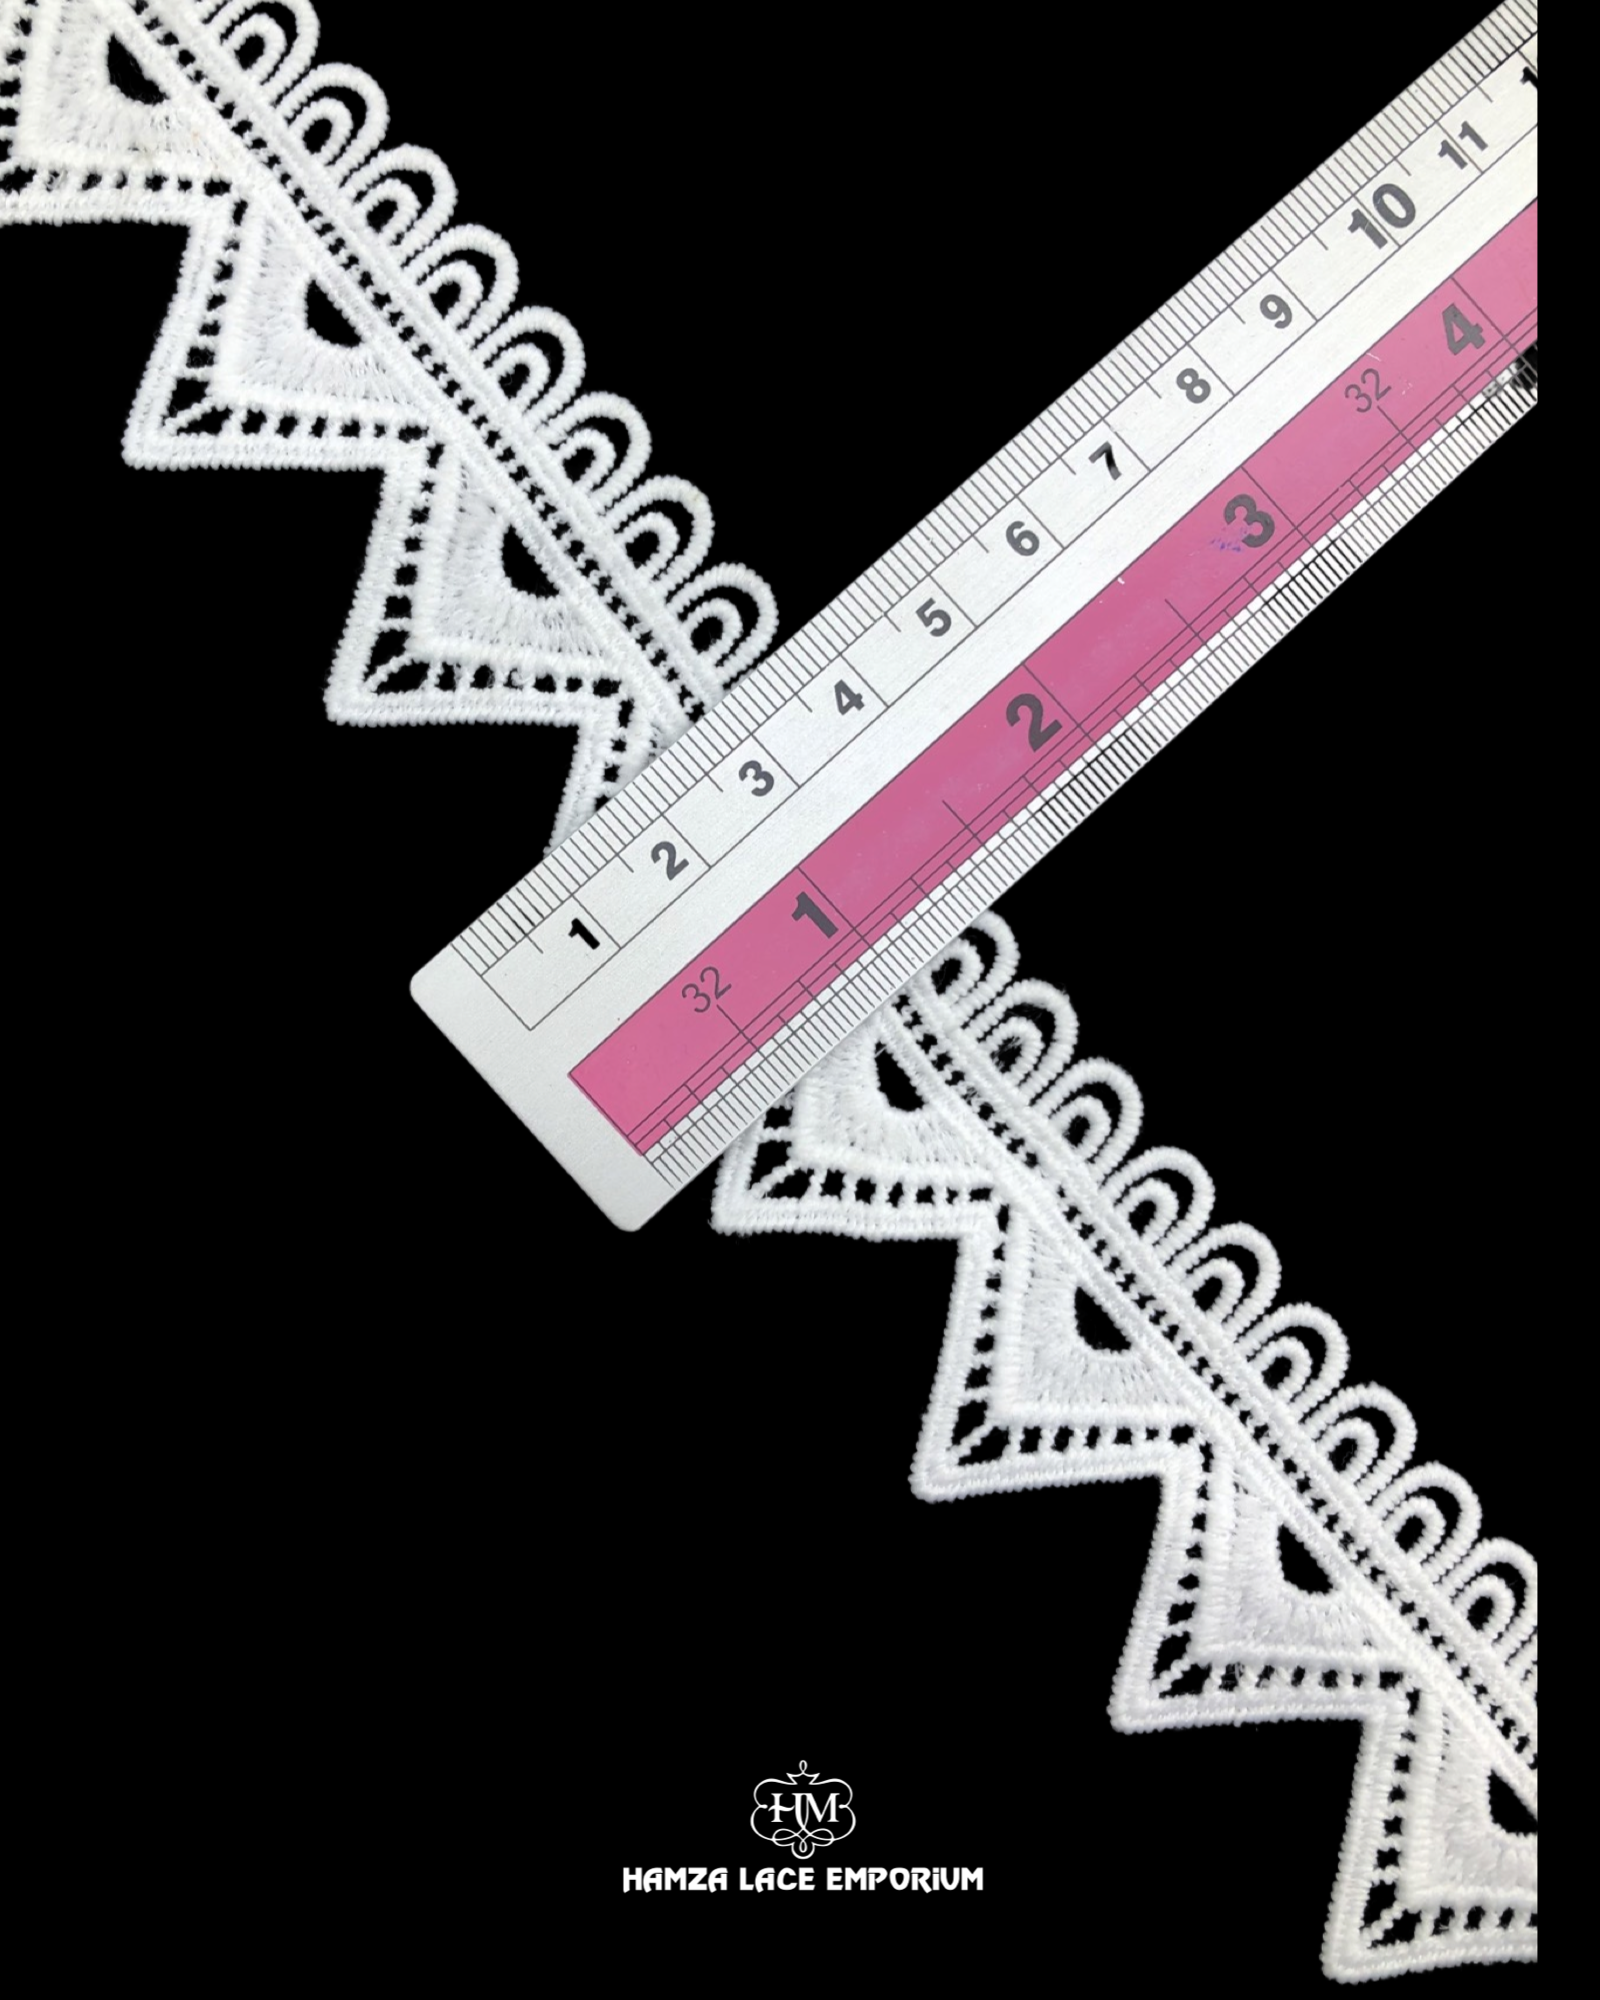 The size of the 'Edging Lace 70730' is shown with the help of a ruler